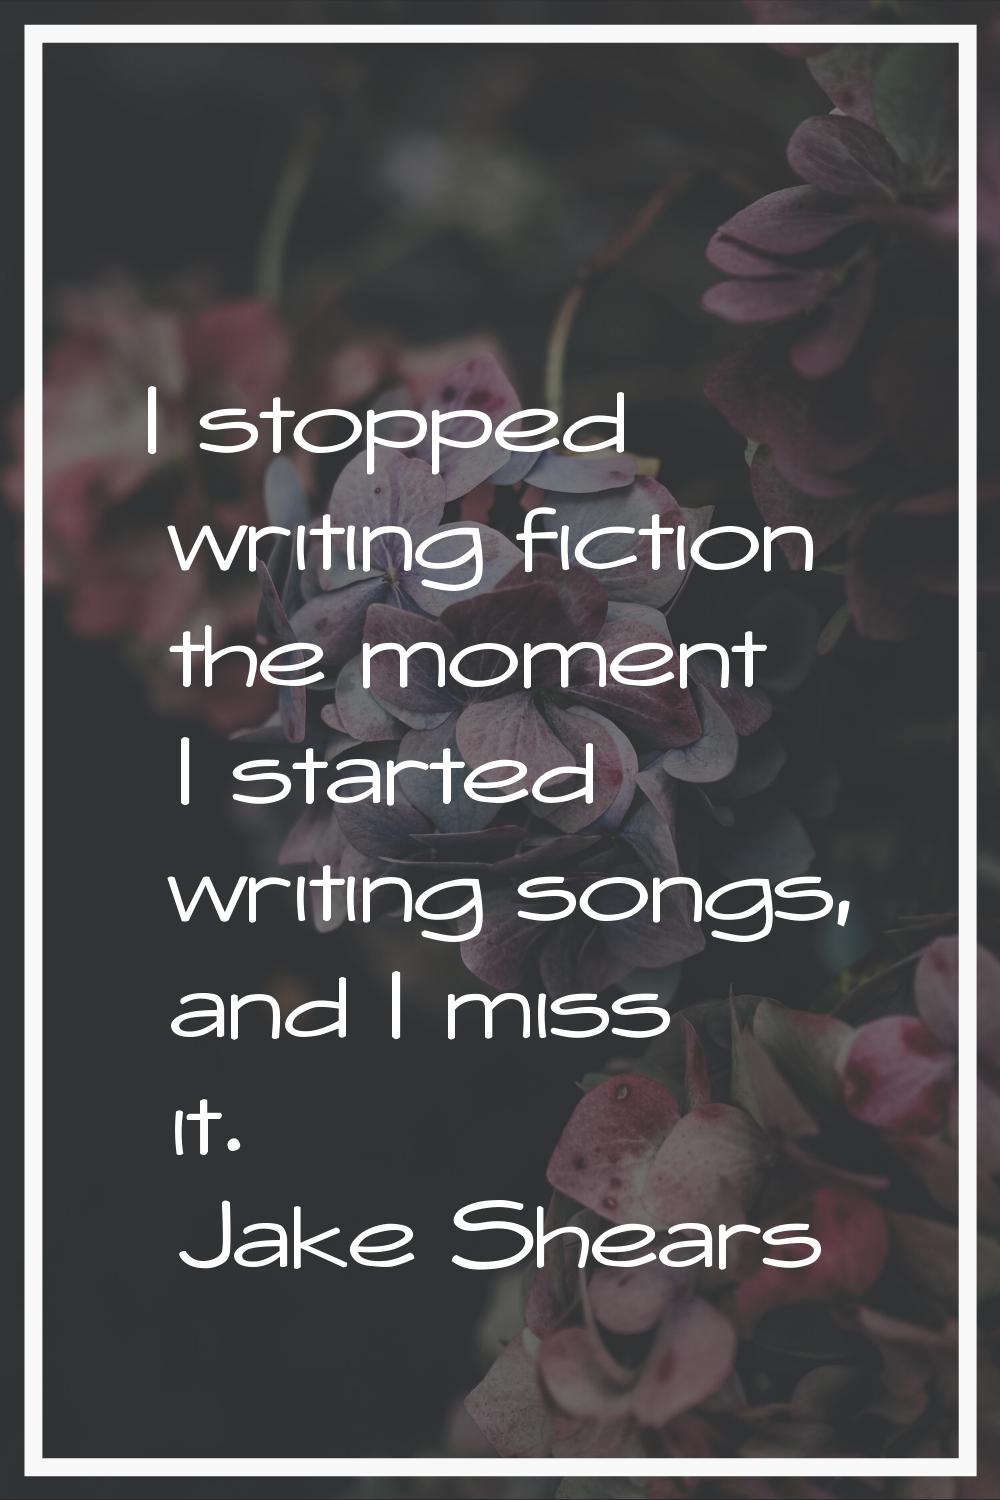 I stopped writing fiction the moment I started writing songs, and I miss it.